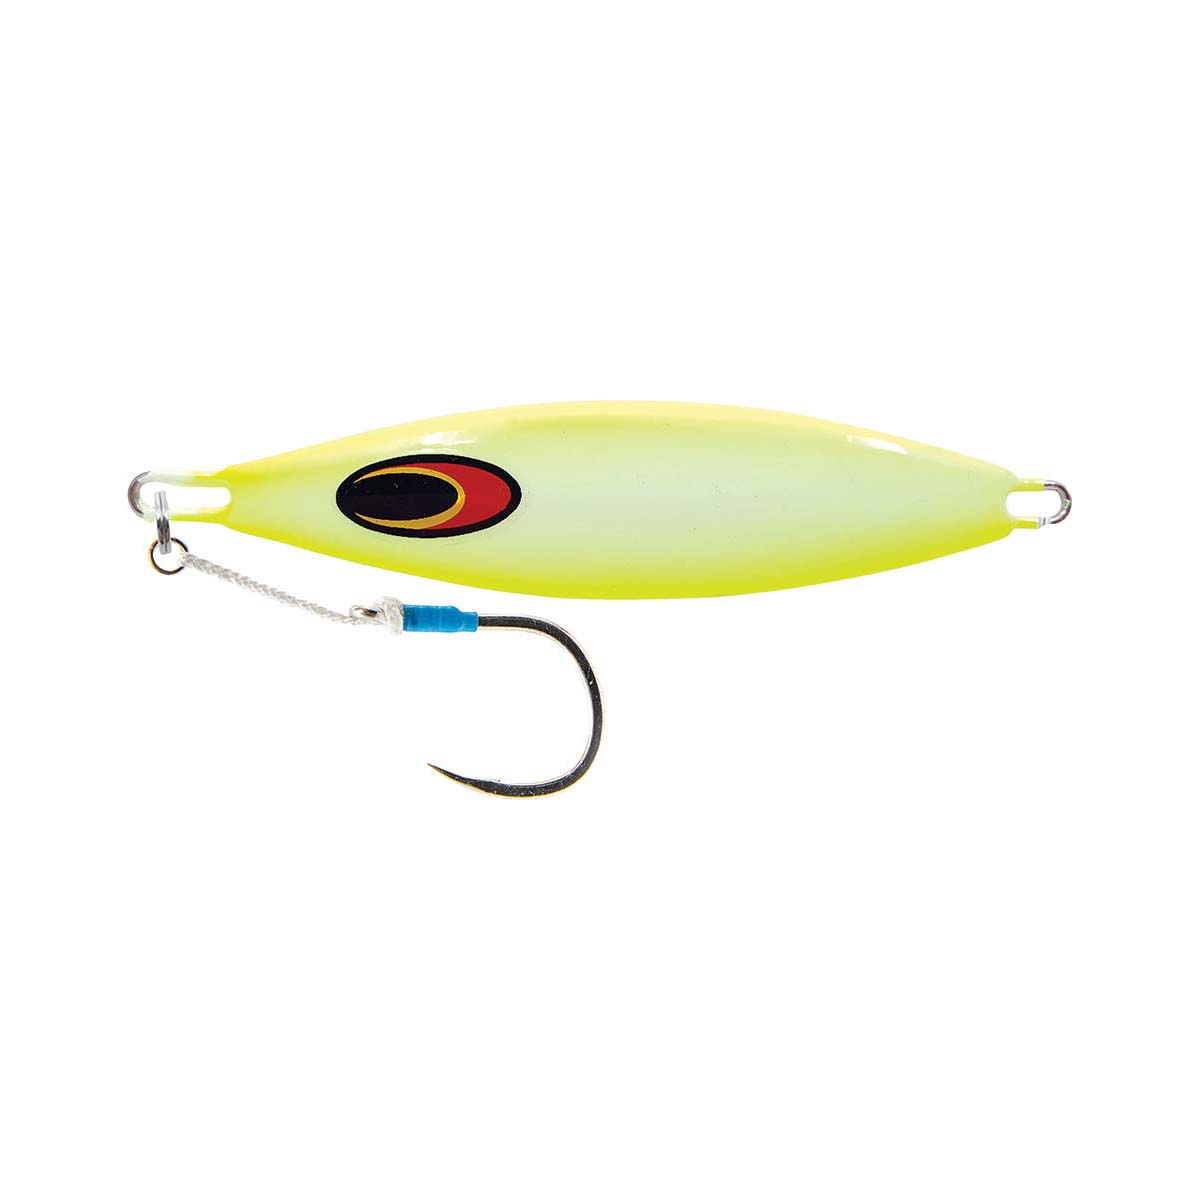 Nomad Buffalo Jig Lure 180g Chartreuse White Glow @ Club BCF